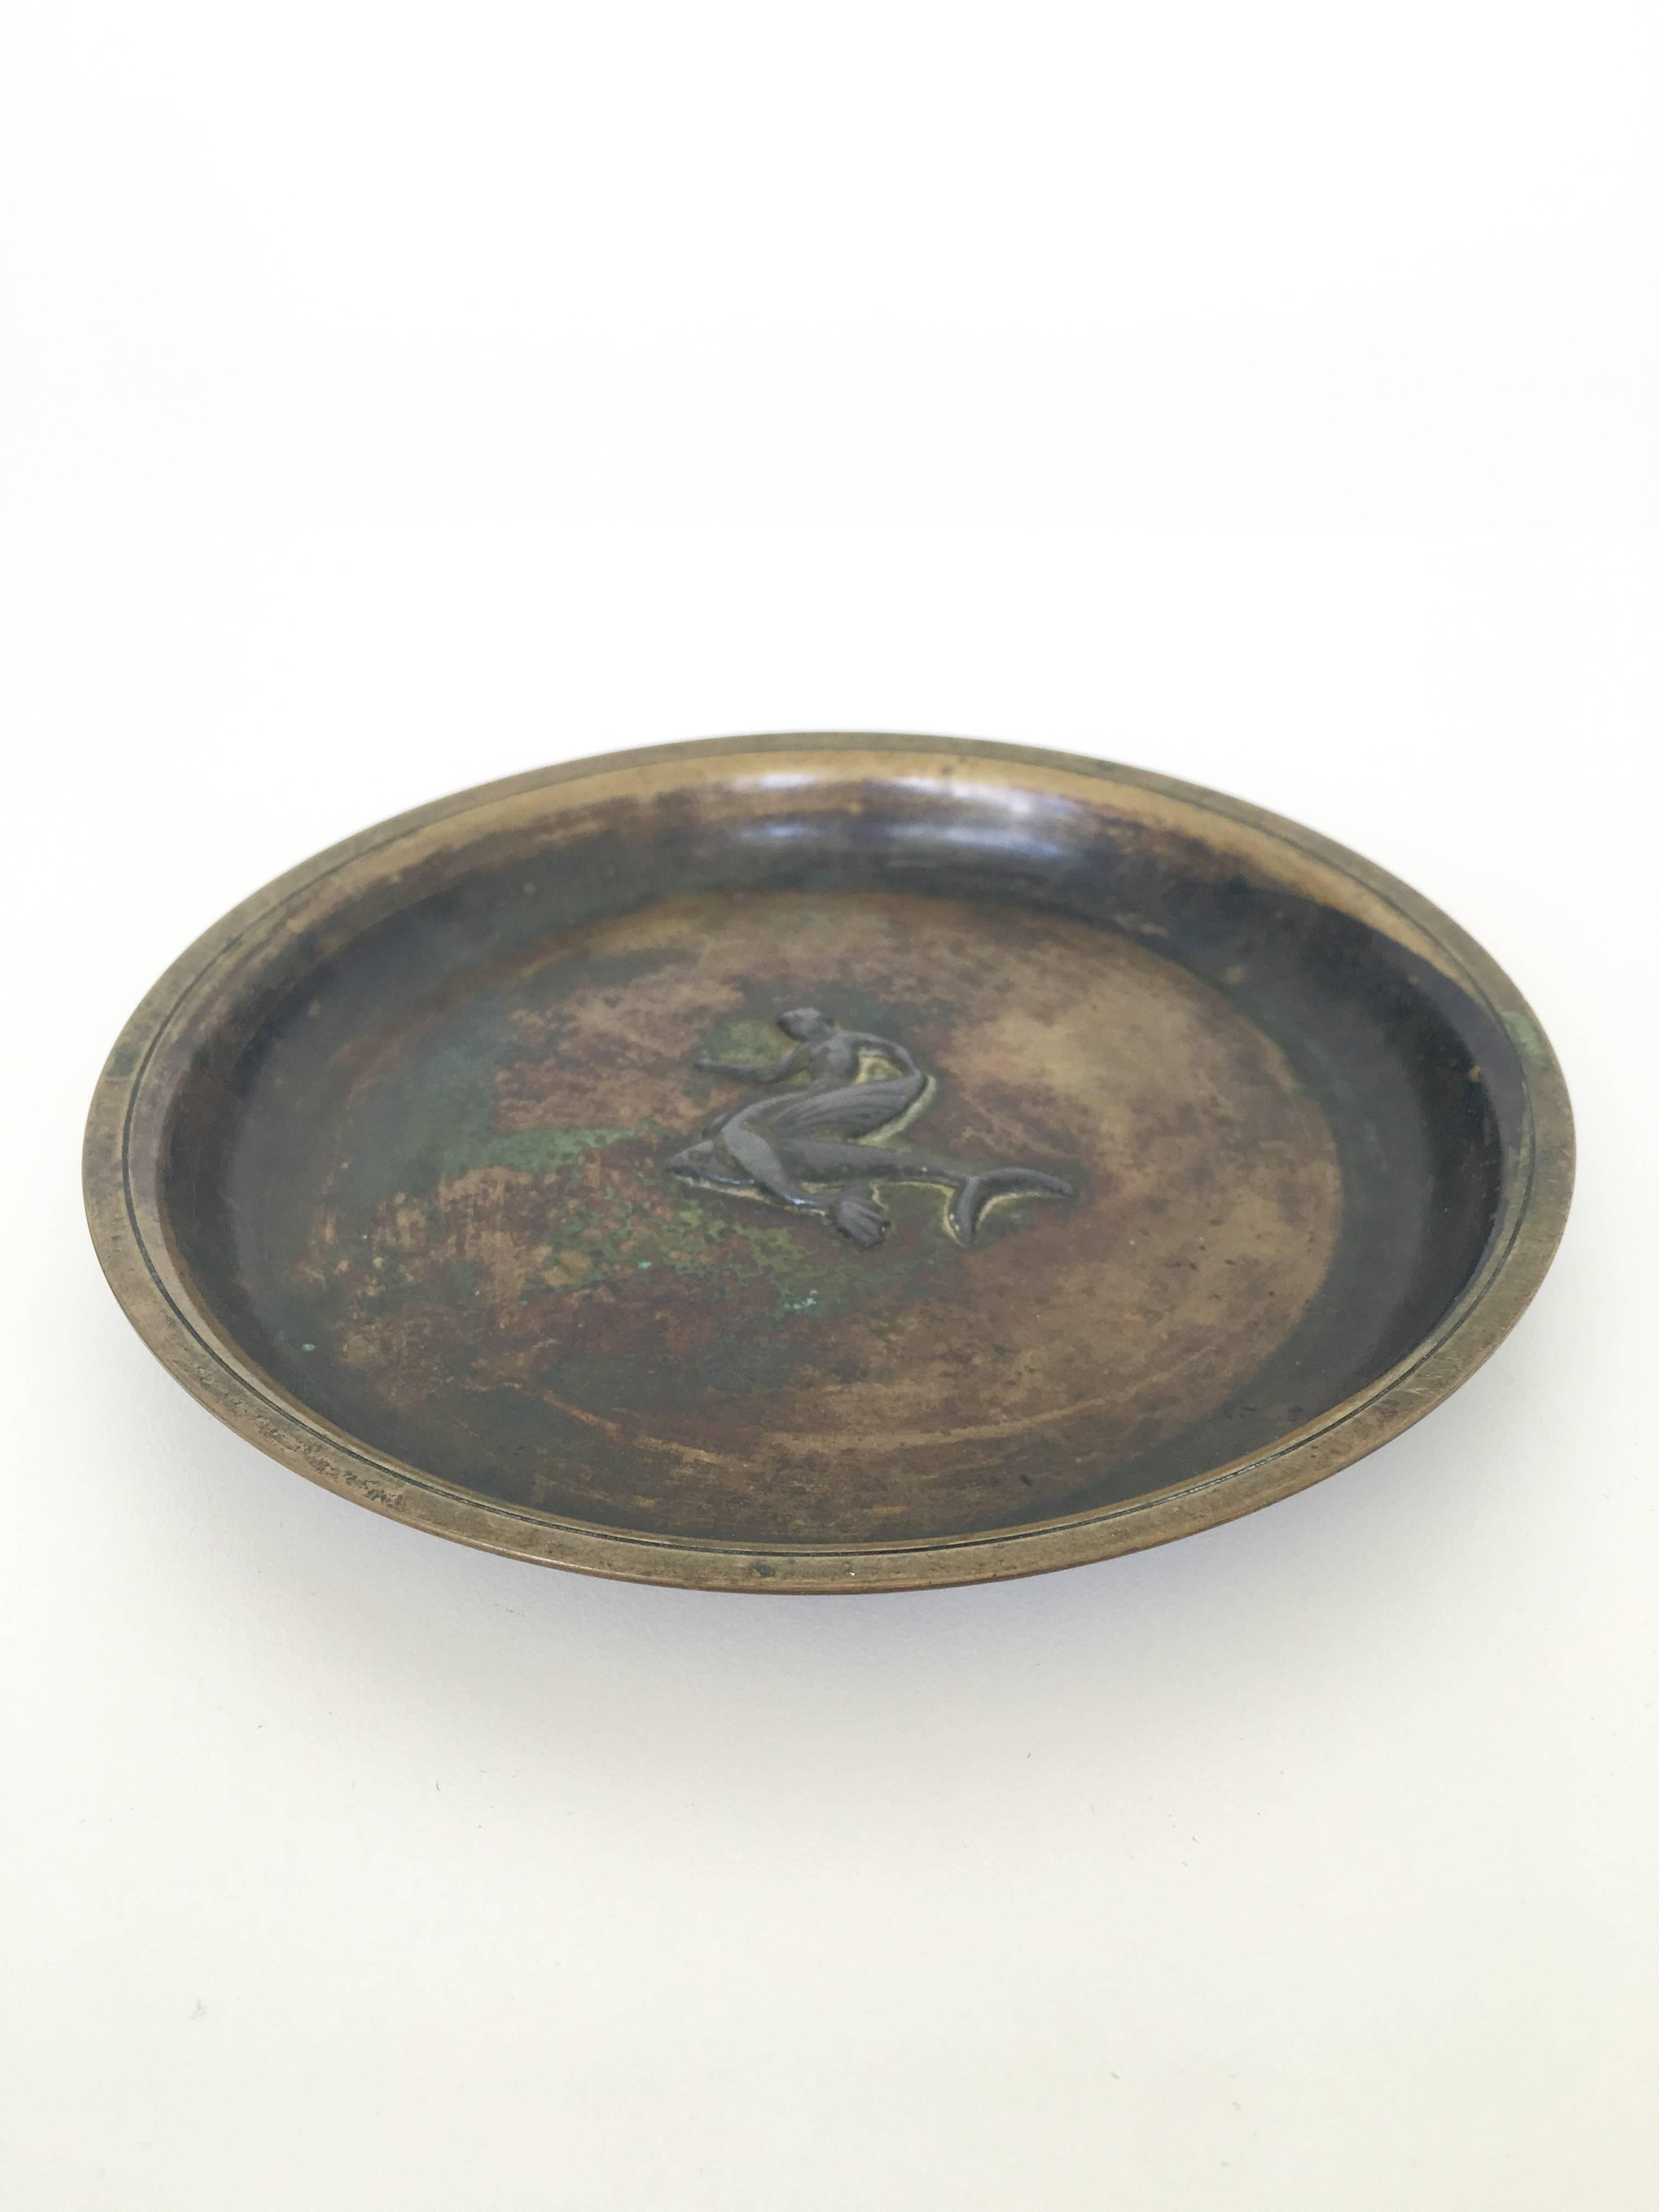 A lovely bronze dish with an embossed detail of a mermaid in the centre. The bronze has a wonderful dark patina and is signed at the bottom.